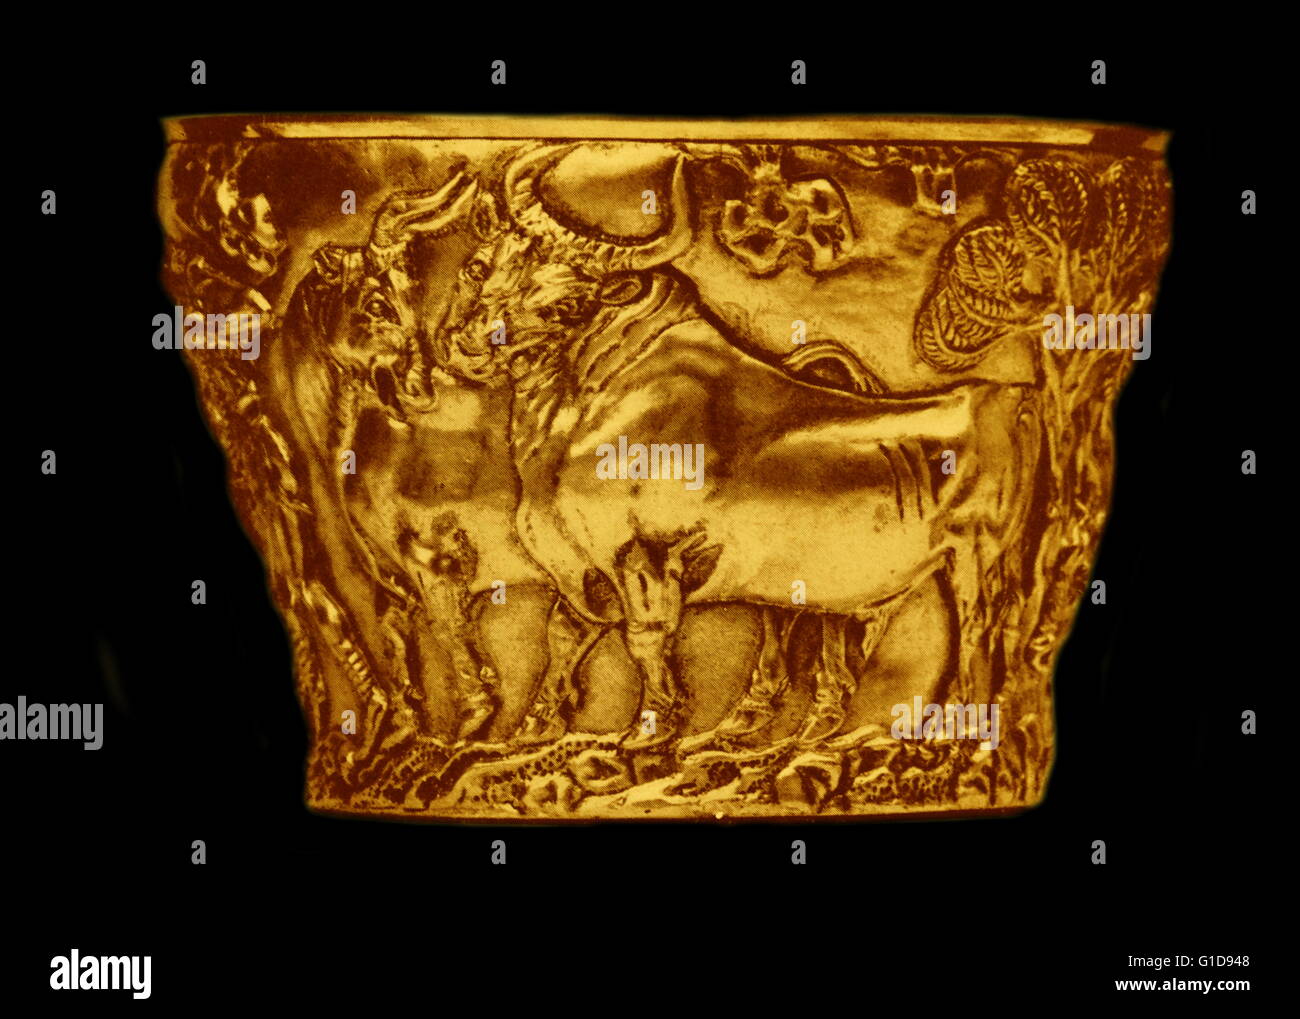 Mycenaean Vapheio cup, Late Bronze Age, First half of 15th c. B.C. Crete-Mycenaean metalwork, found together with other precious objects in the Vapheio tholos tomb. One-handled cup with flaring straight sides. decoration depicting bulls covers the entire surface Stock Photo